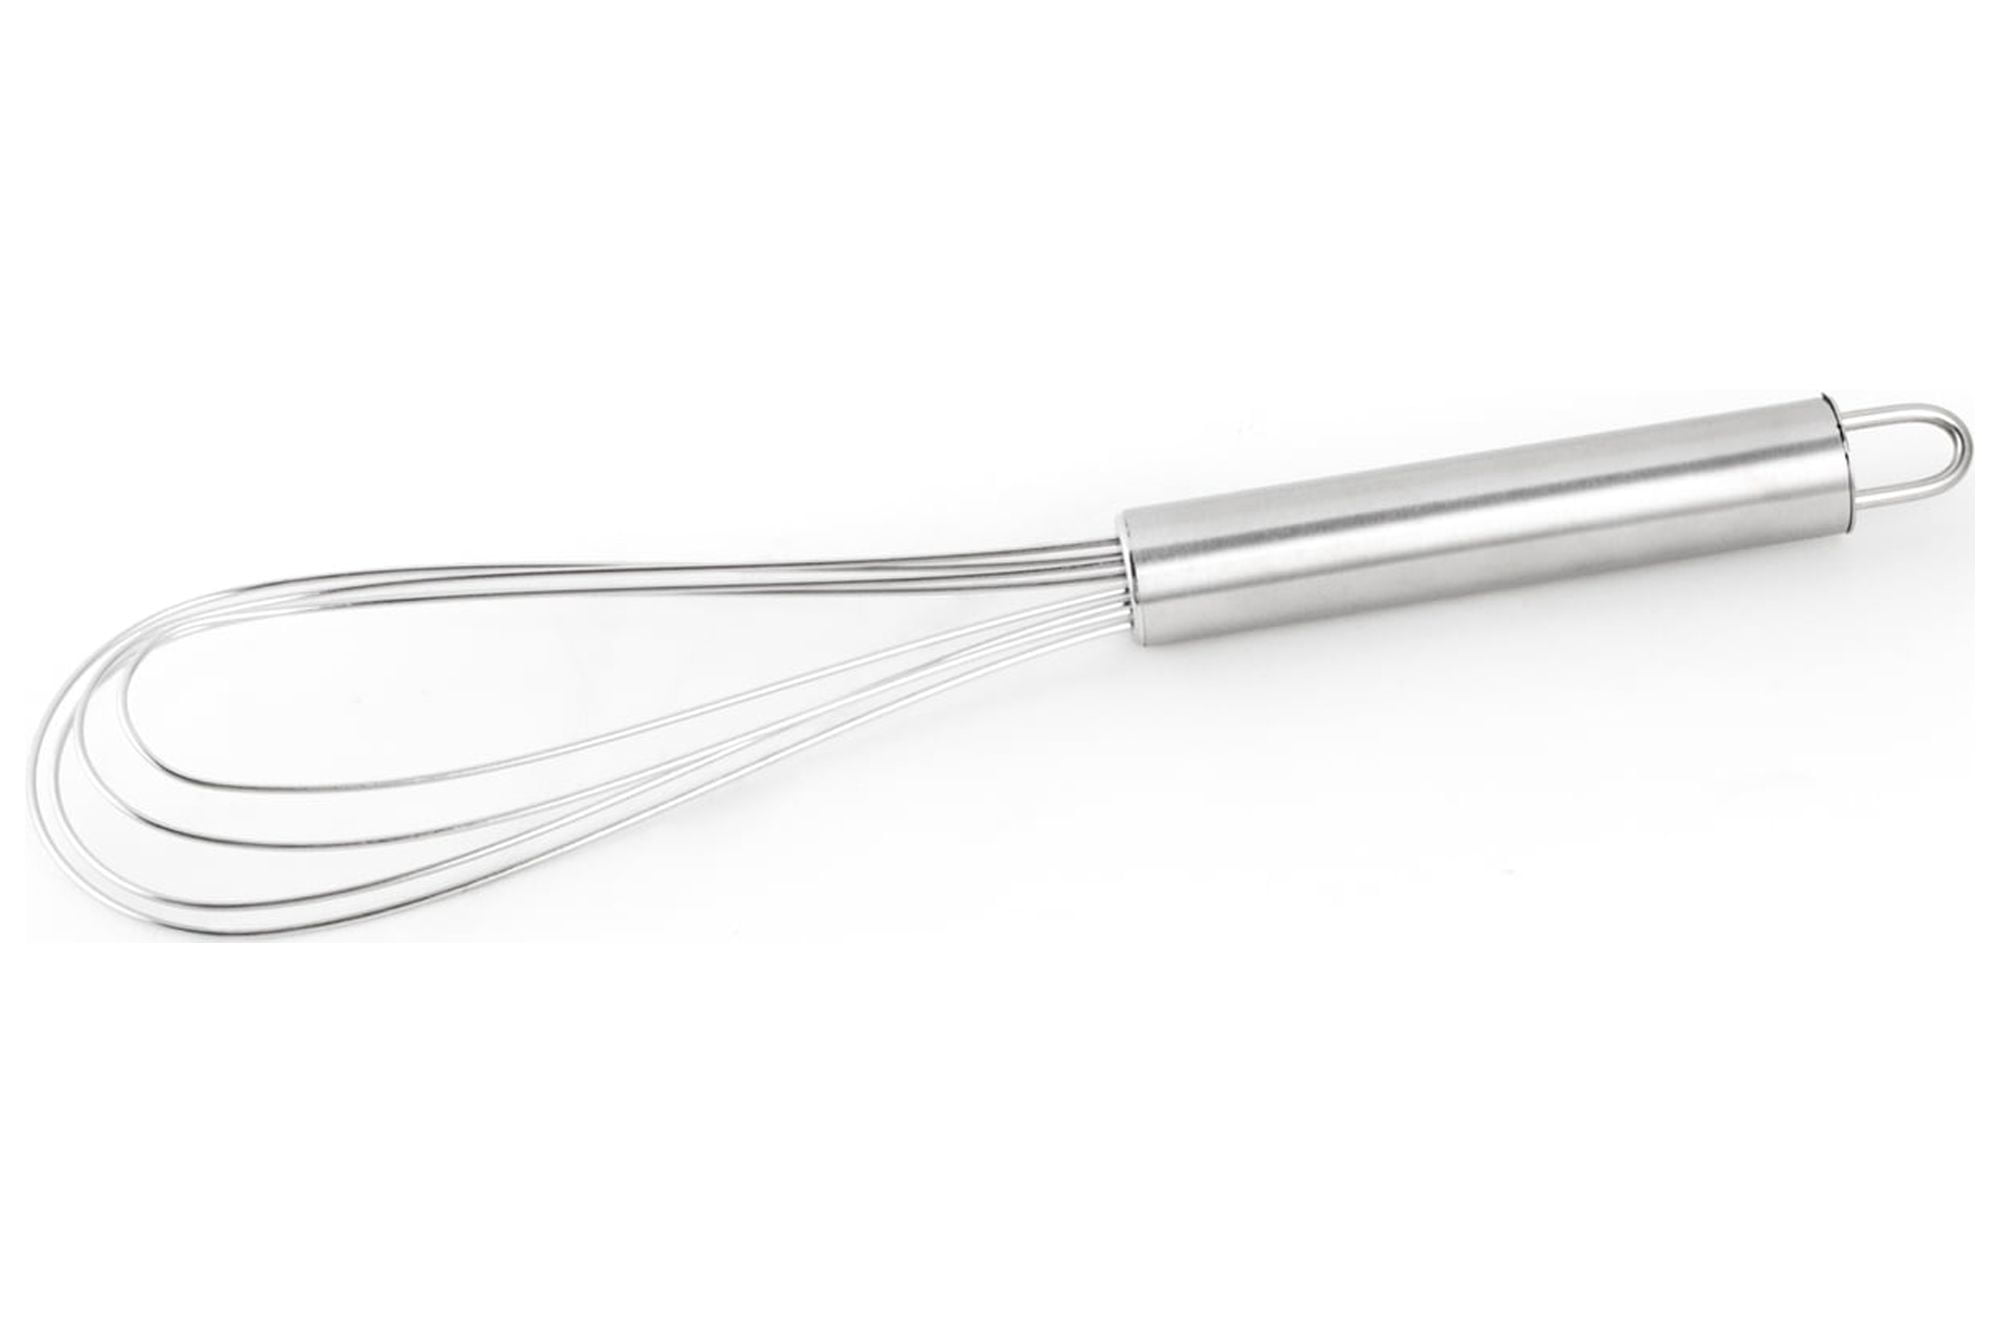 This Tiktok-famous Whisk Folds Flat for Easy Cleaning – SheKnows